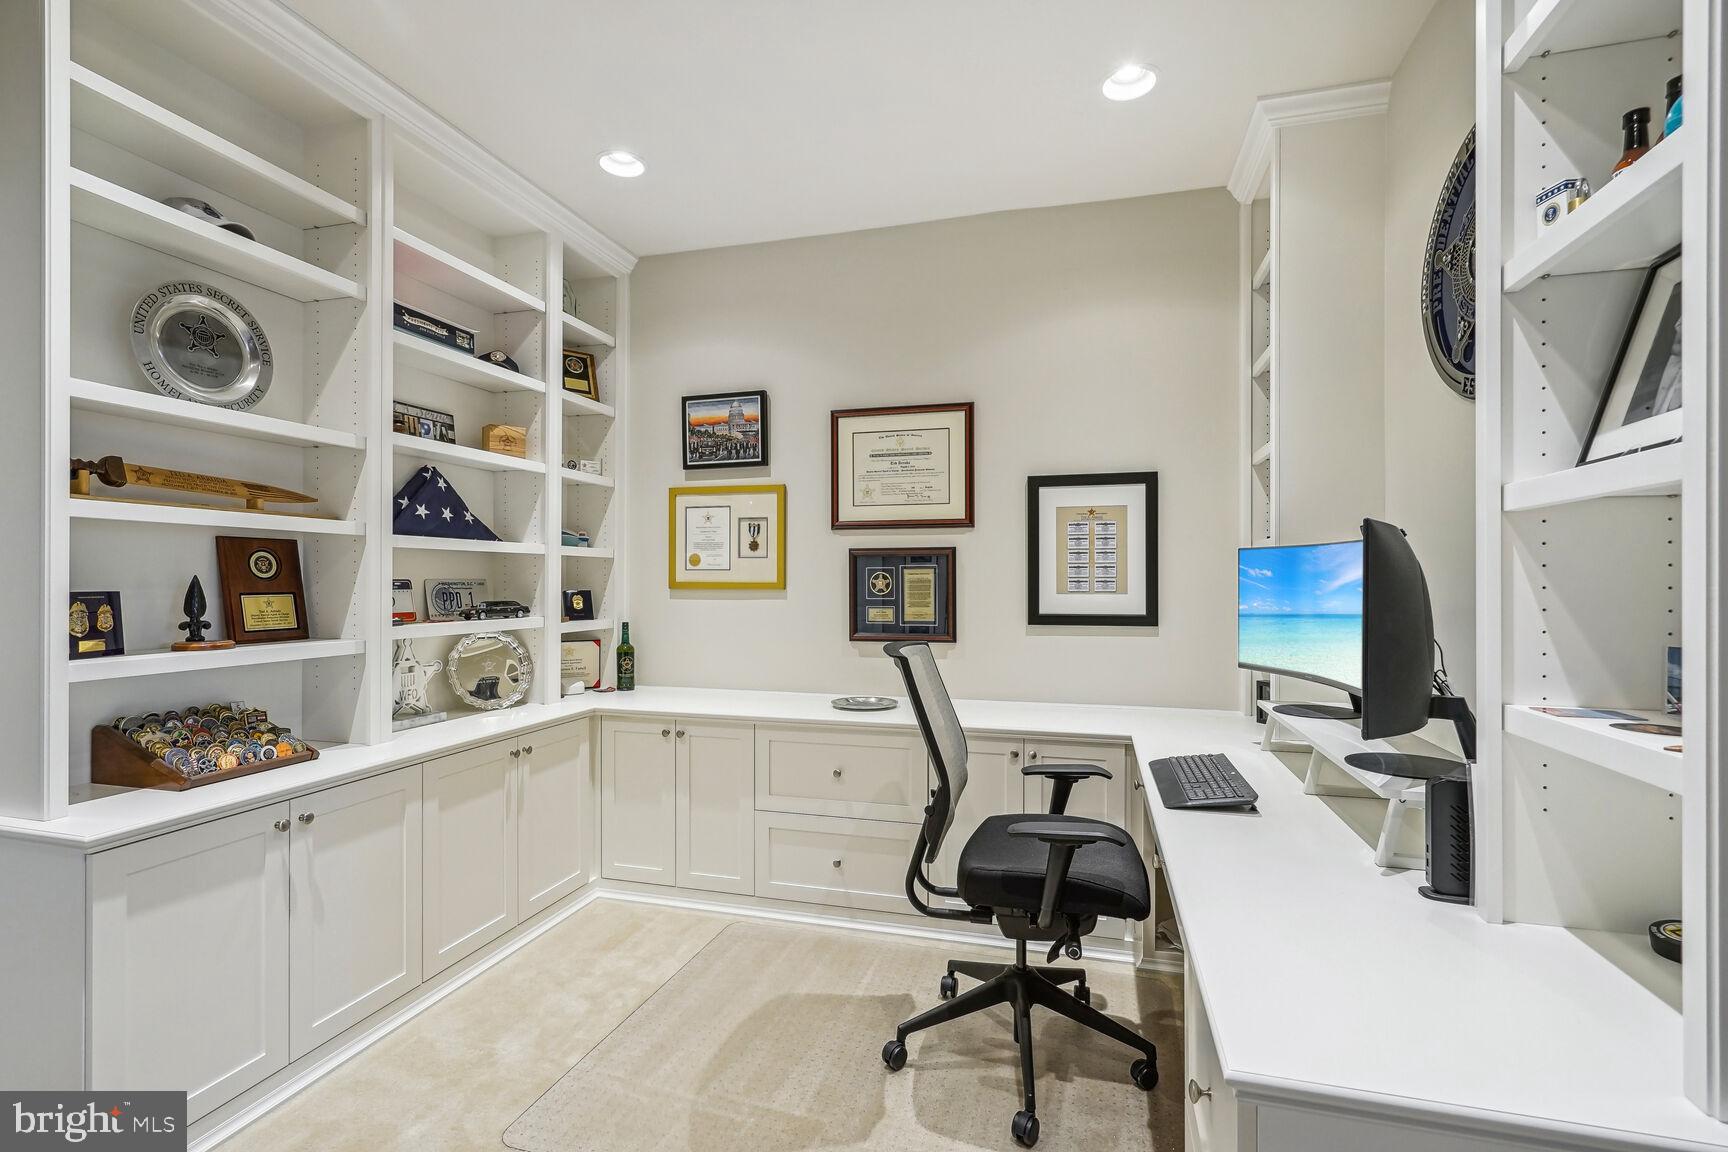 Acquire home office furniture at the best prices in Alexandria, VA.